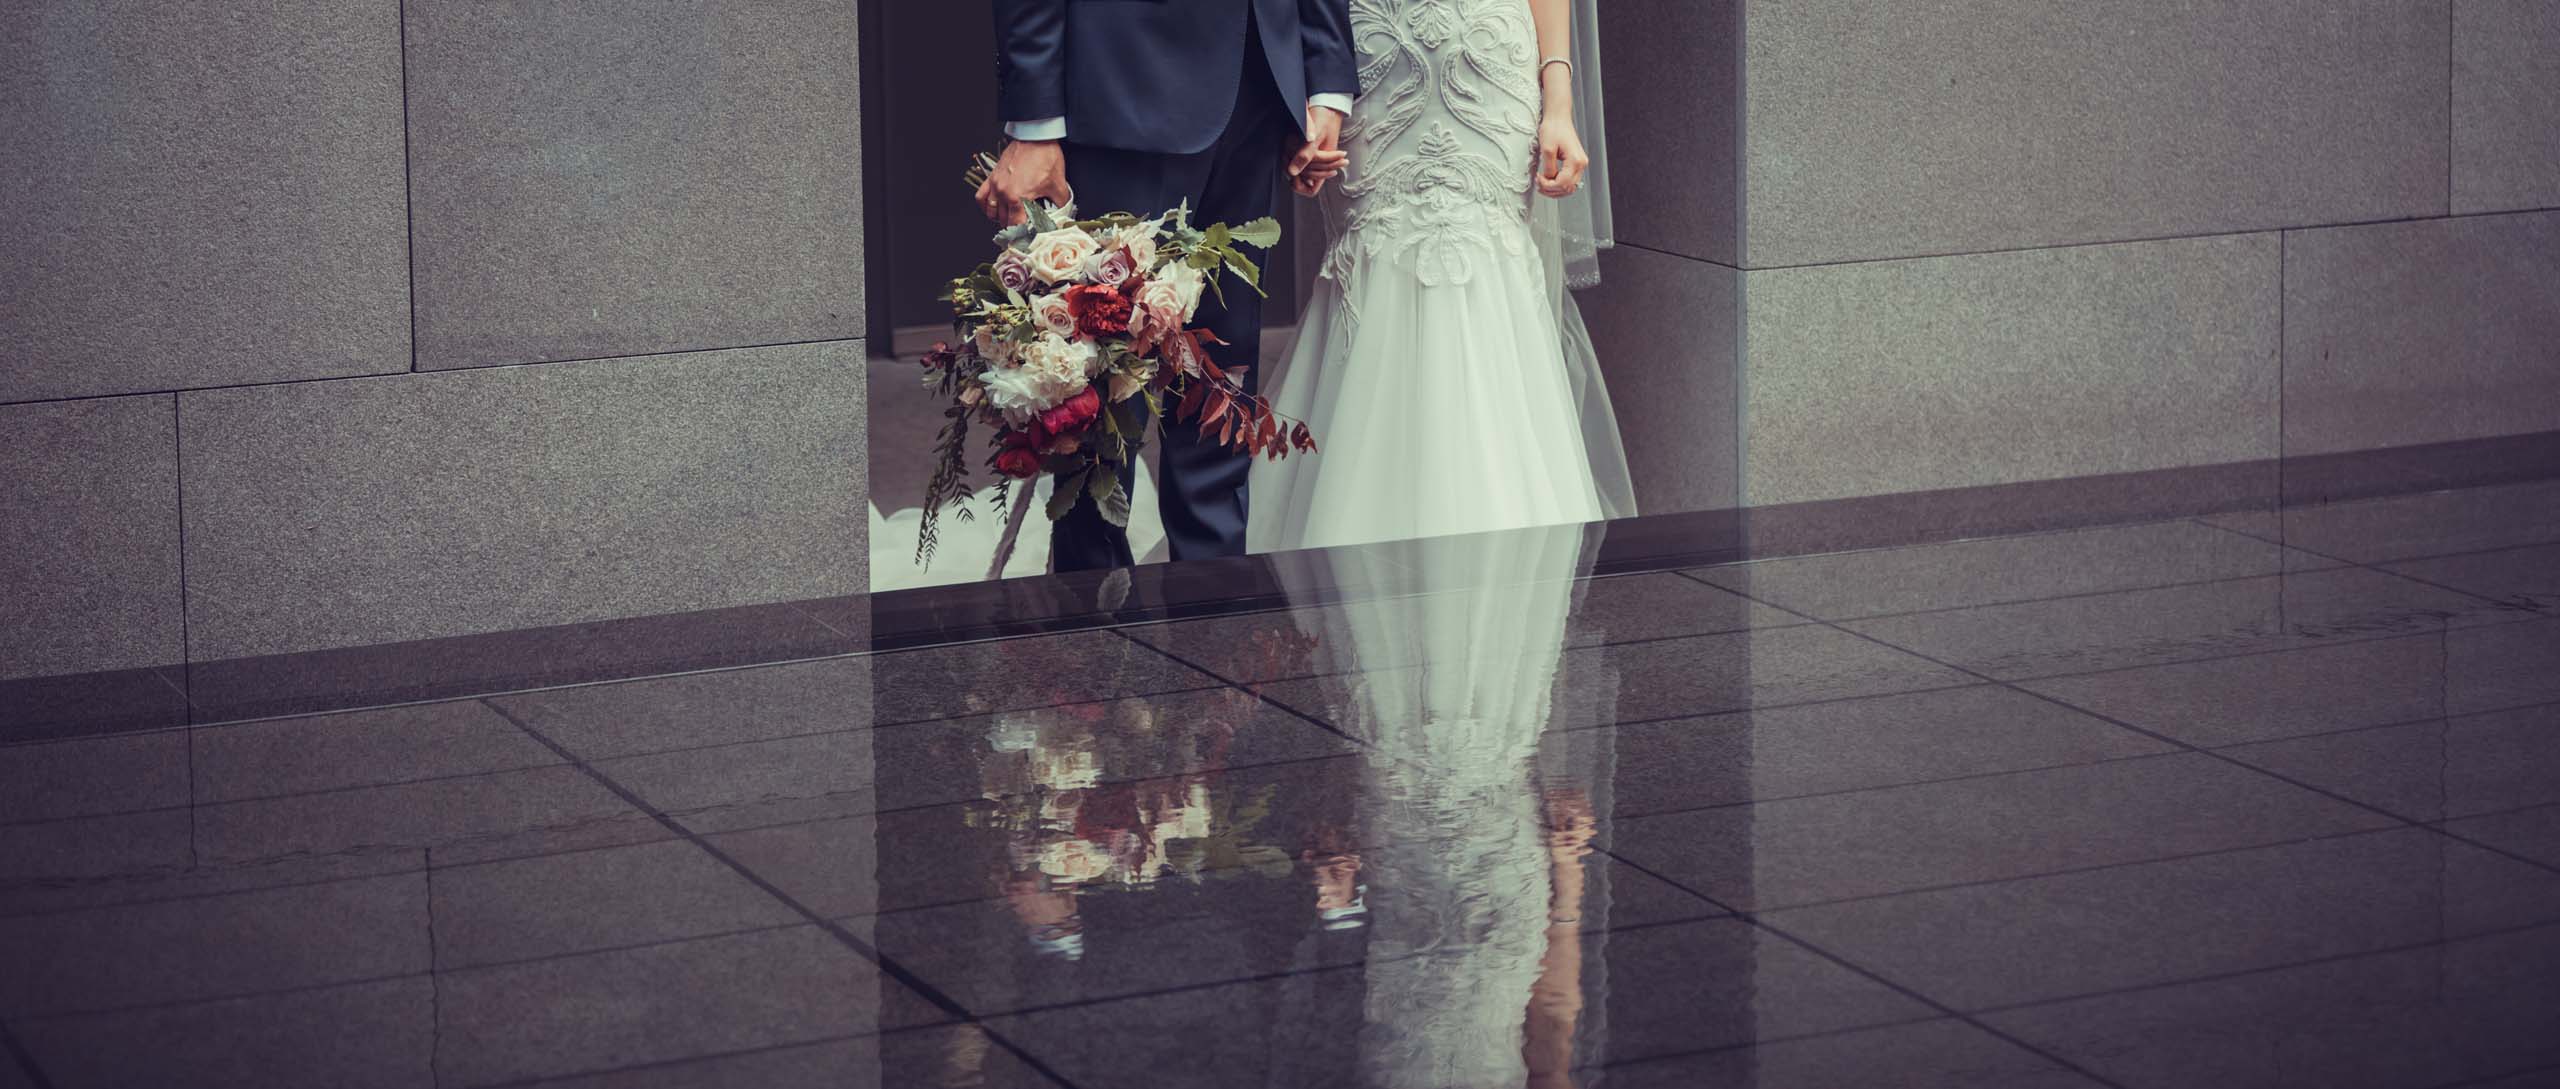 Bride and Groom Reflection